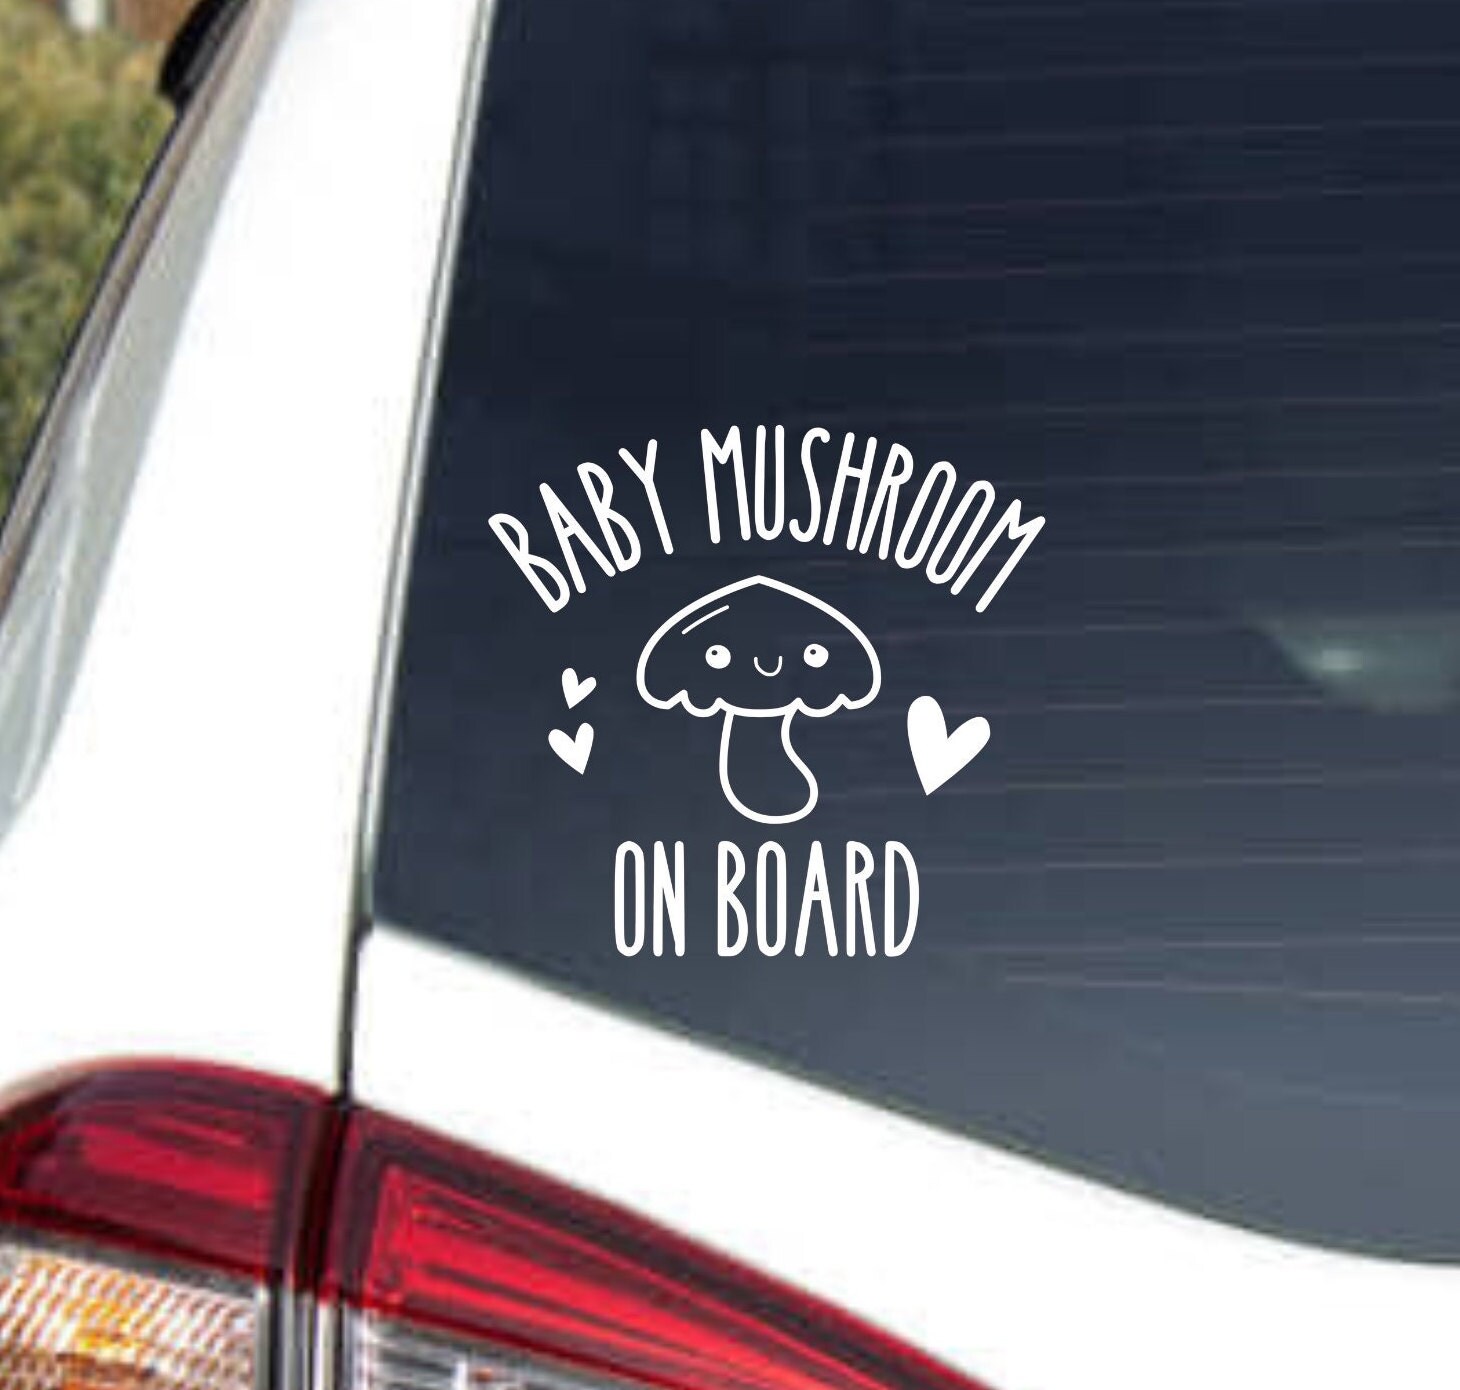 TOTOMO Baby on Board Sticker for Cars Funny Cute India